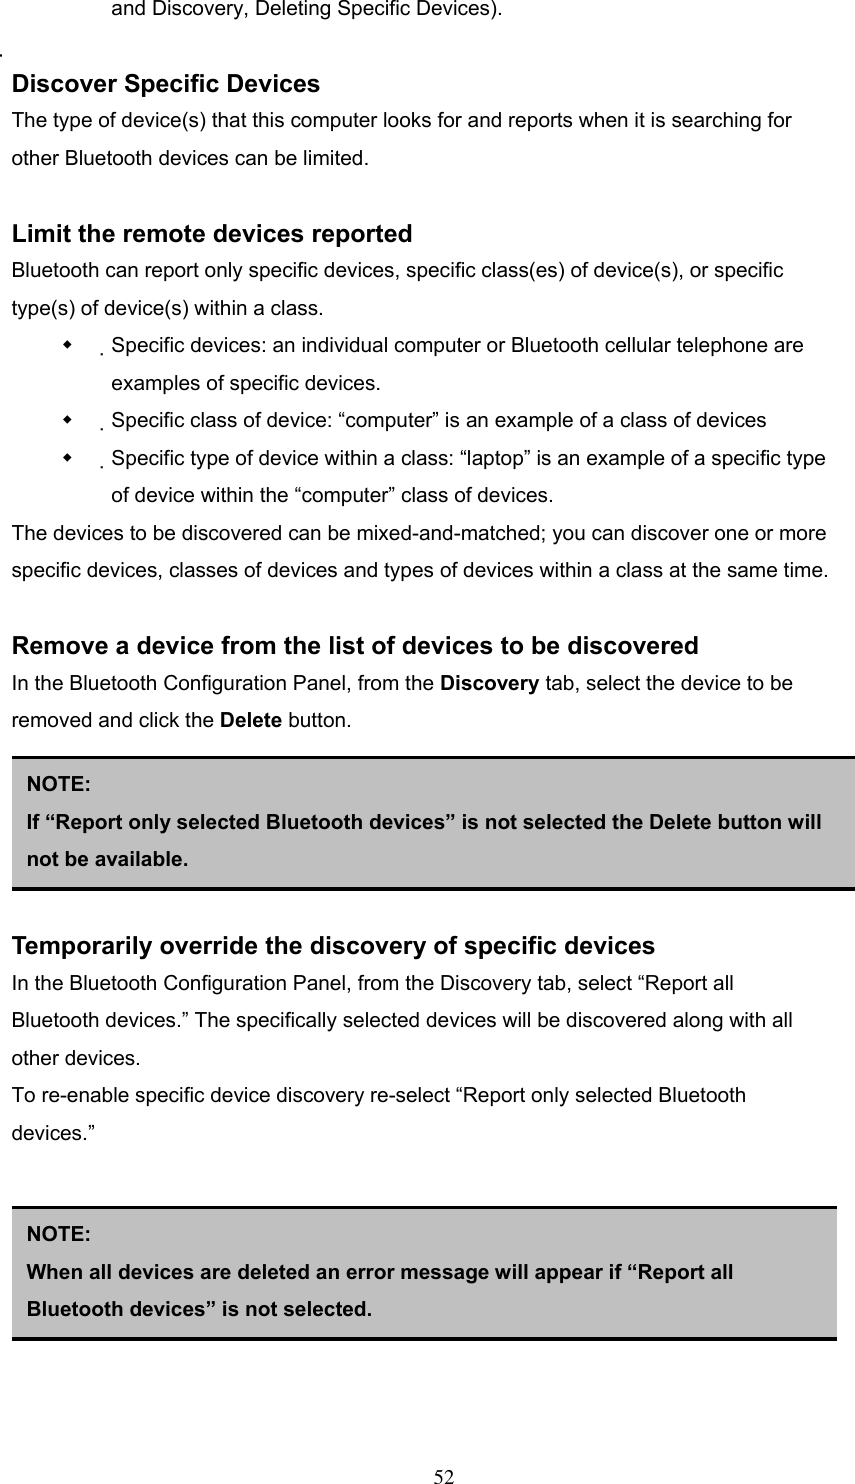 and Discovery, Deleting Specific Devices).  Discover Specific Devices The type of device(s) that this computer looks for and reports when it is searching for other Bluetooth devices can be limited.  Limit the remote devices reported Bluetooth can report only specific devices, specific class(es) of device(s), or specific type(s) of device(s) within a class.   Specific devices: an individual computer or Bluetooth cellular telephone are examples of specific devices.   Specific class of device: “computer” is an example of a class of devices   Specific type of device within a class: “laptop” is an example of a specific type of device within the “computer” class of devices. The devices to be discovered can be mixed-and-matched; you can discover one or more specific devices, classes of devices and types of devices within a class at the same time.  Remove a device from the list of devices to be discovered In the Bluetooth Configuration Panel, from the Discovery tab, select the device to be removed and click the Delete button.      NOTE: If “Report only selected Bluetooth devices” is not selected the Delete button will not be available. Temporarily override the discovery of specific devices In the Bluetooth Configuration Panel, from the Discovery tab, select “Report all Bluetooth devices.” The specifically selected devices will be discovered along with all other devices. To re-enable specific device discovery re-select “Report only selected Bluetooth devices.”       NOTE:  When all devices are deleted an error message will appear if “Report all Bluetooth devices” is not selected.   52 